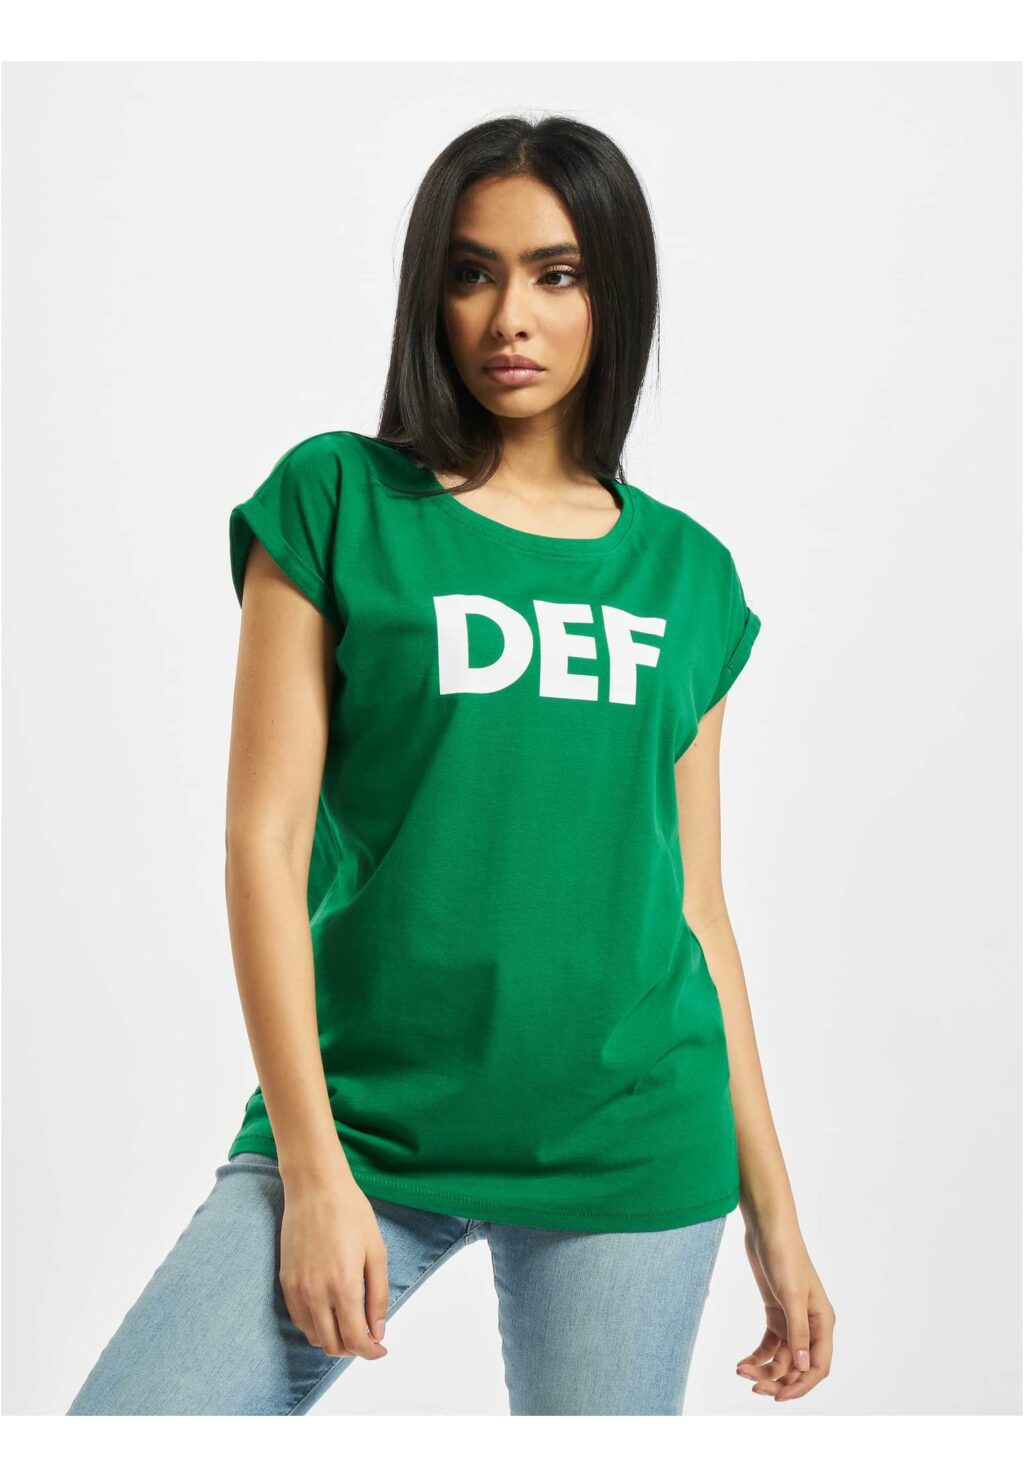 DEF Sizza T-Shirt turquoise DFTS056